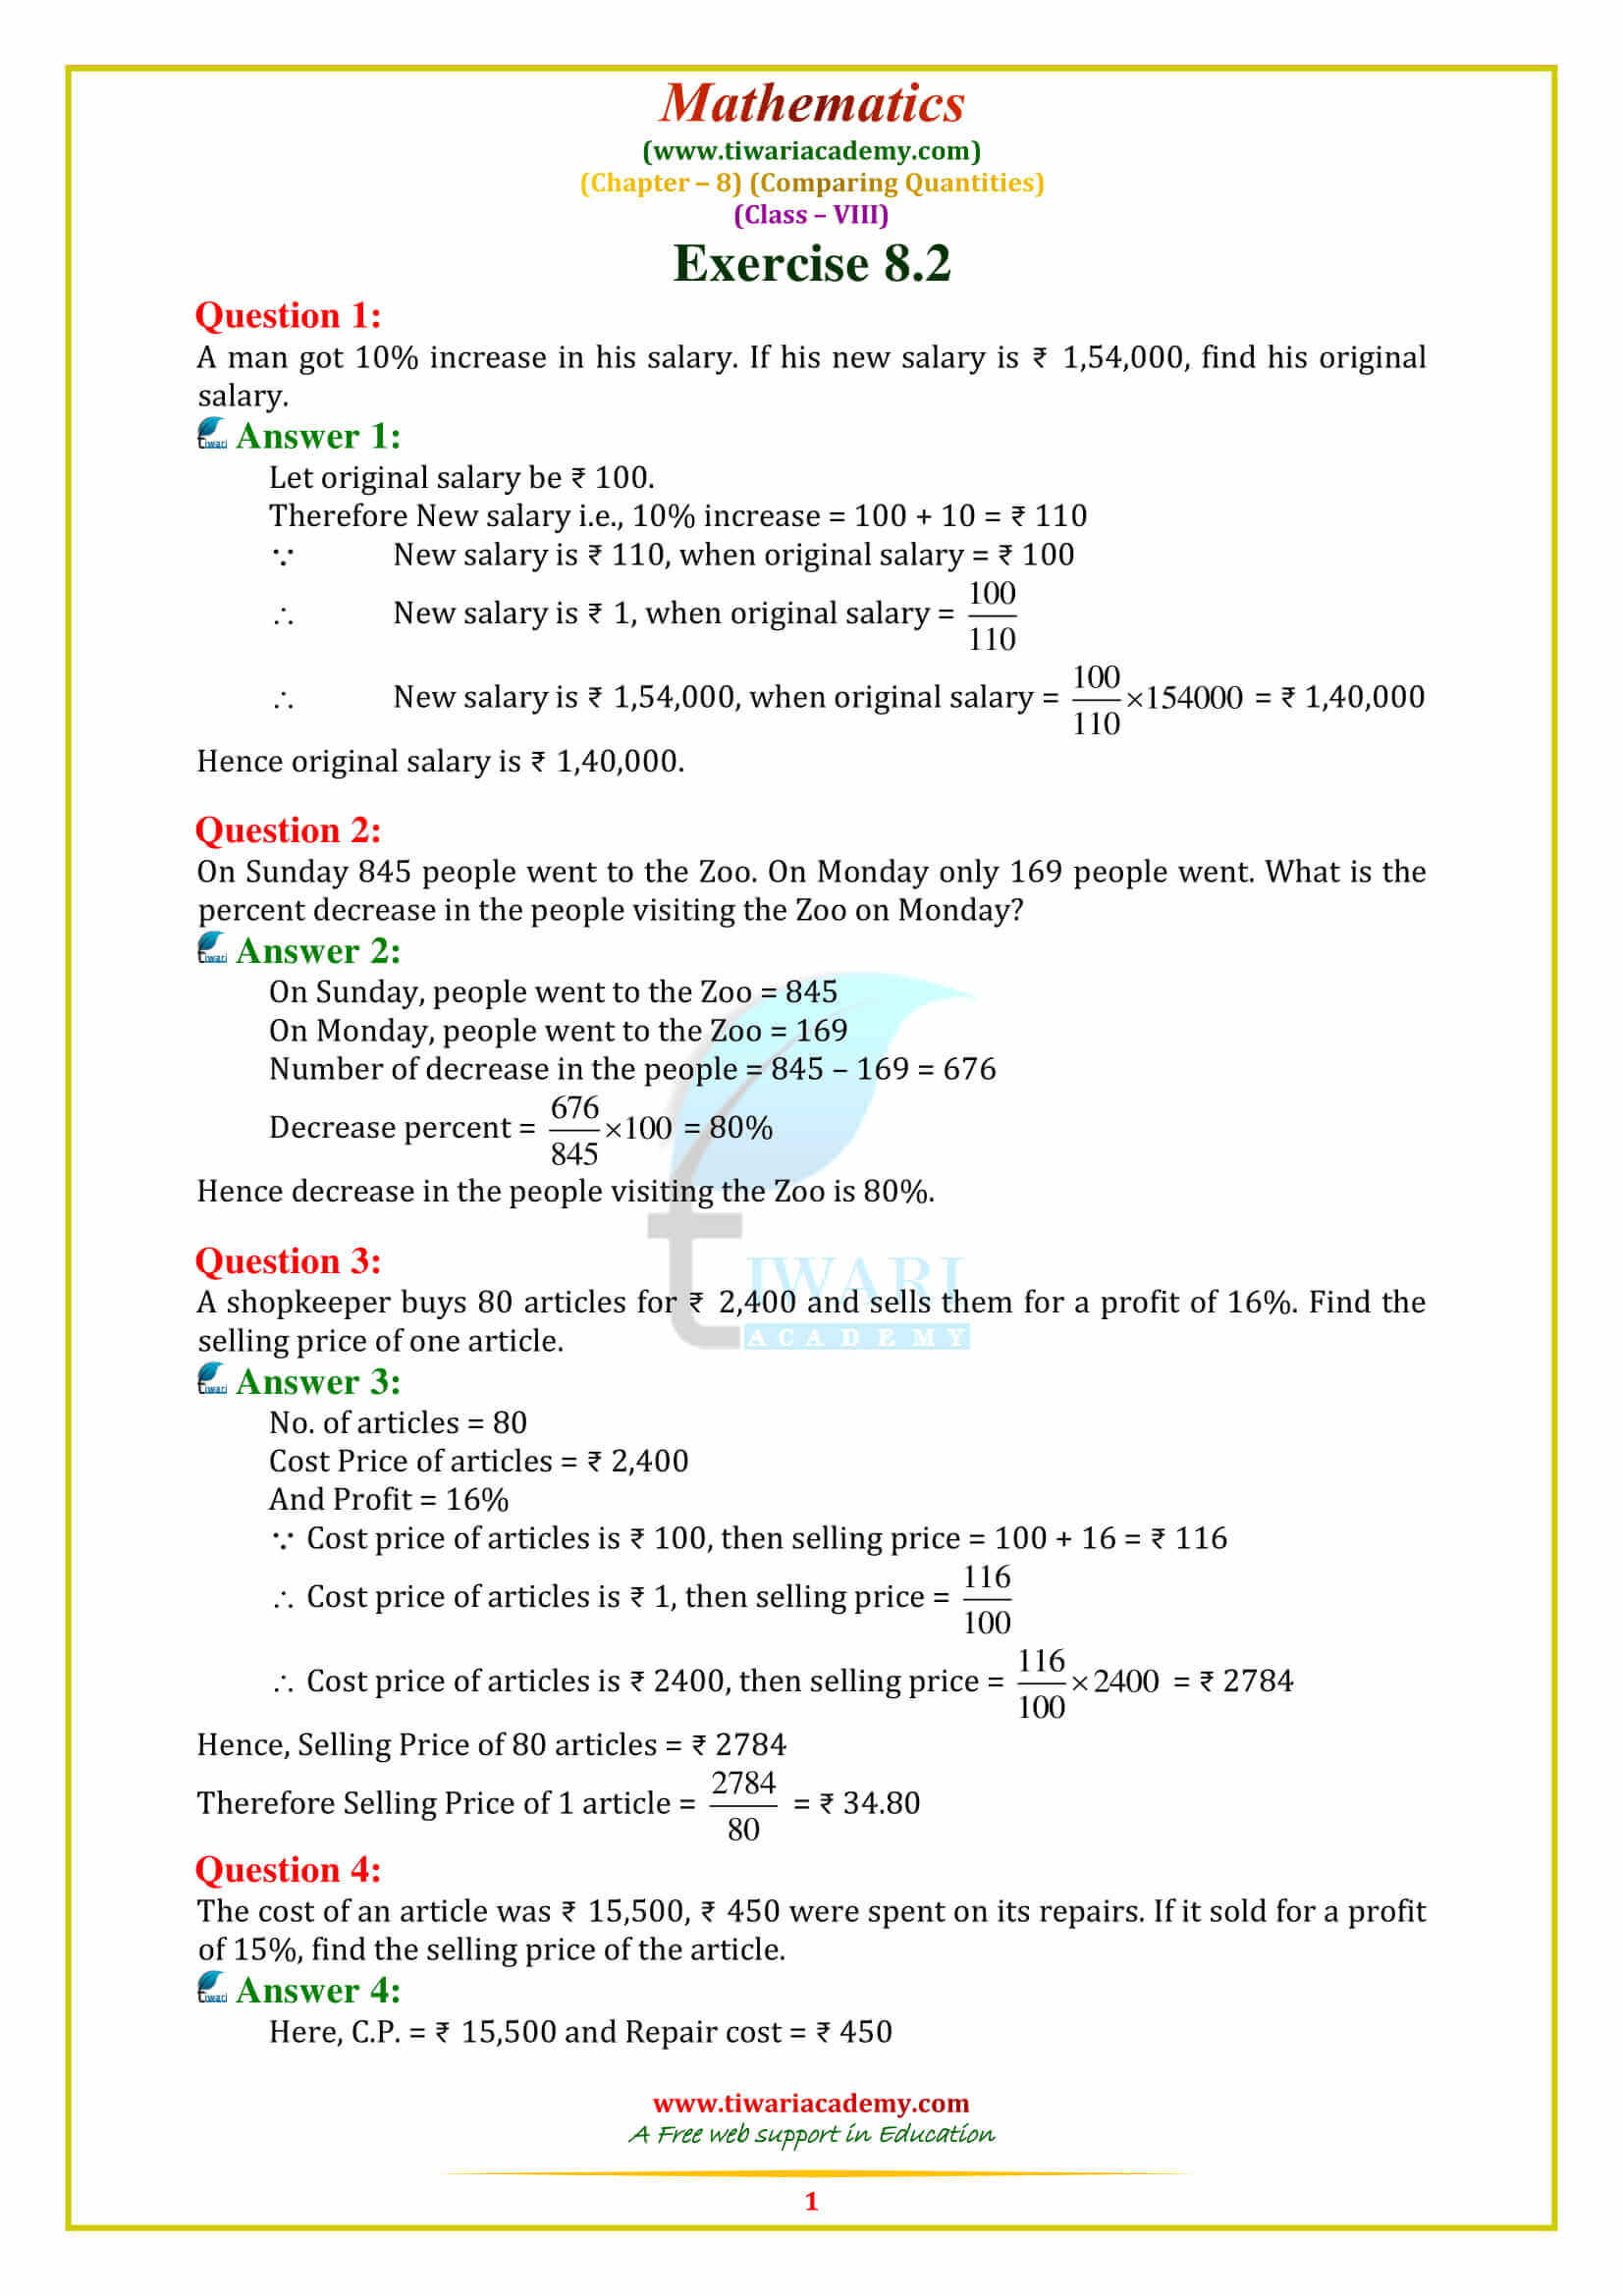 NCERT Solutions for Class 8 Maths Chapter 8 COMPARING QUANTITIES exercise 8.2 in pdf form